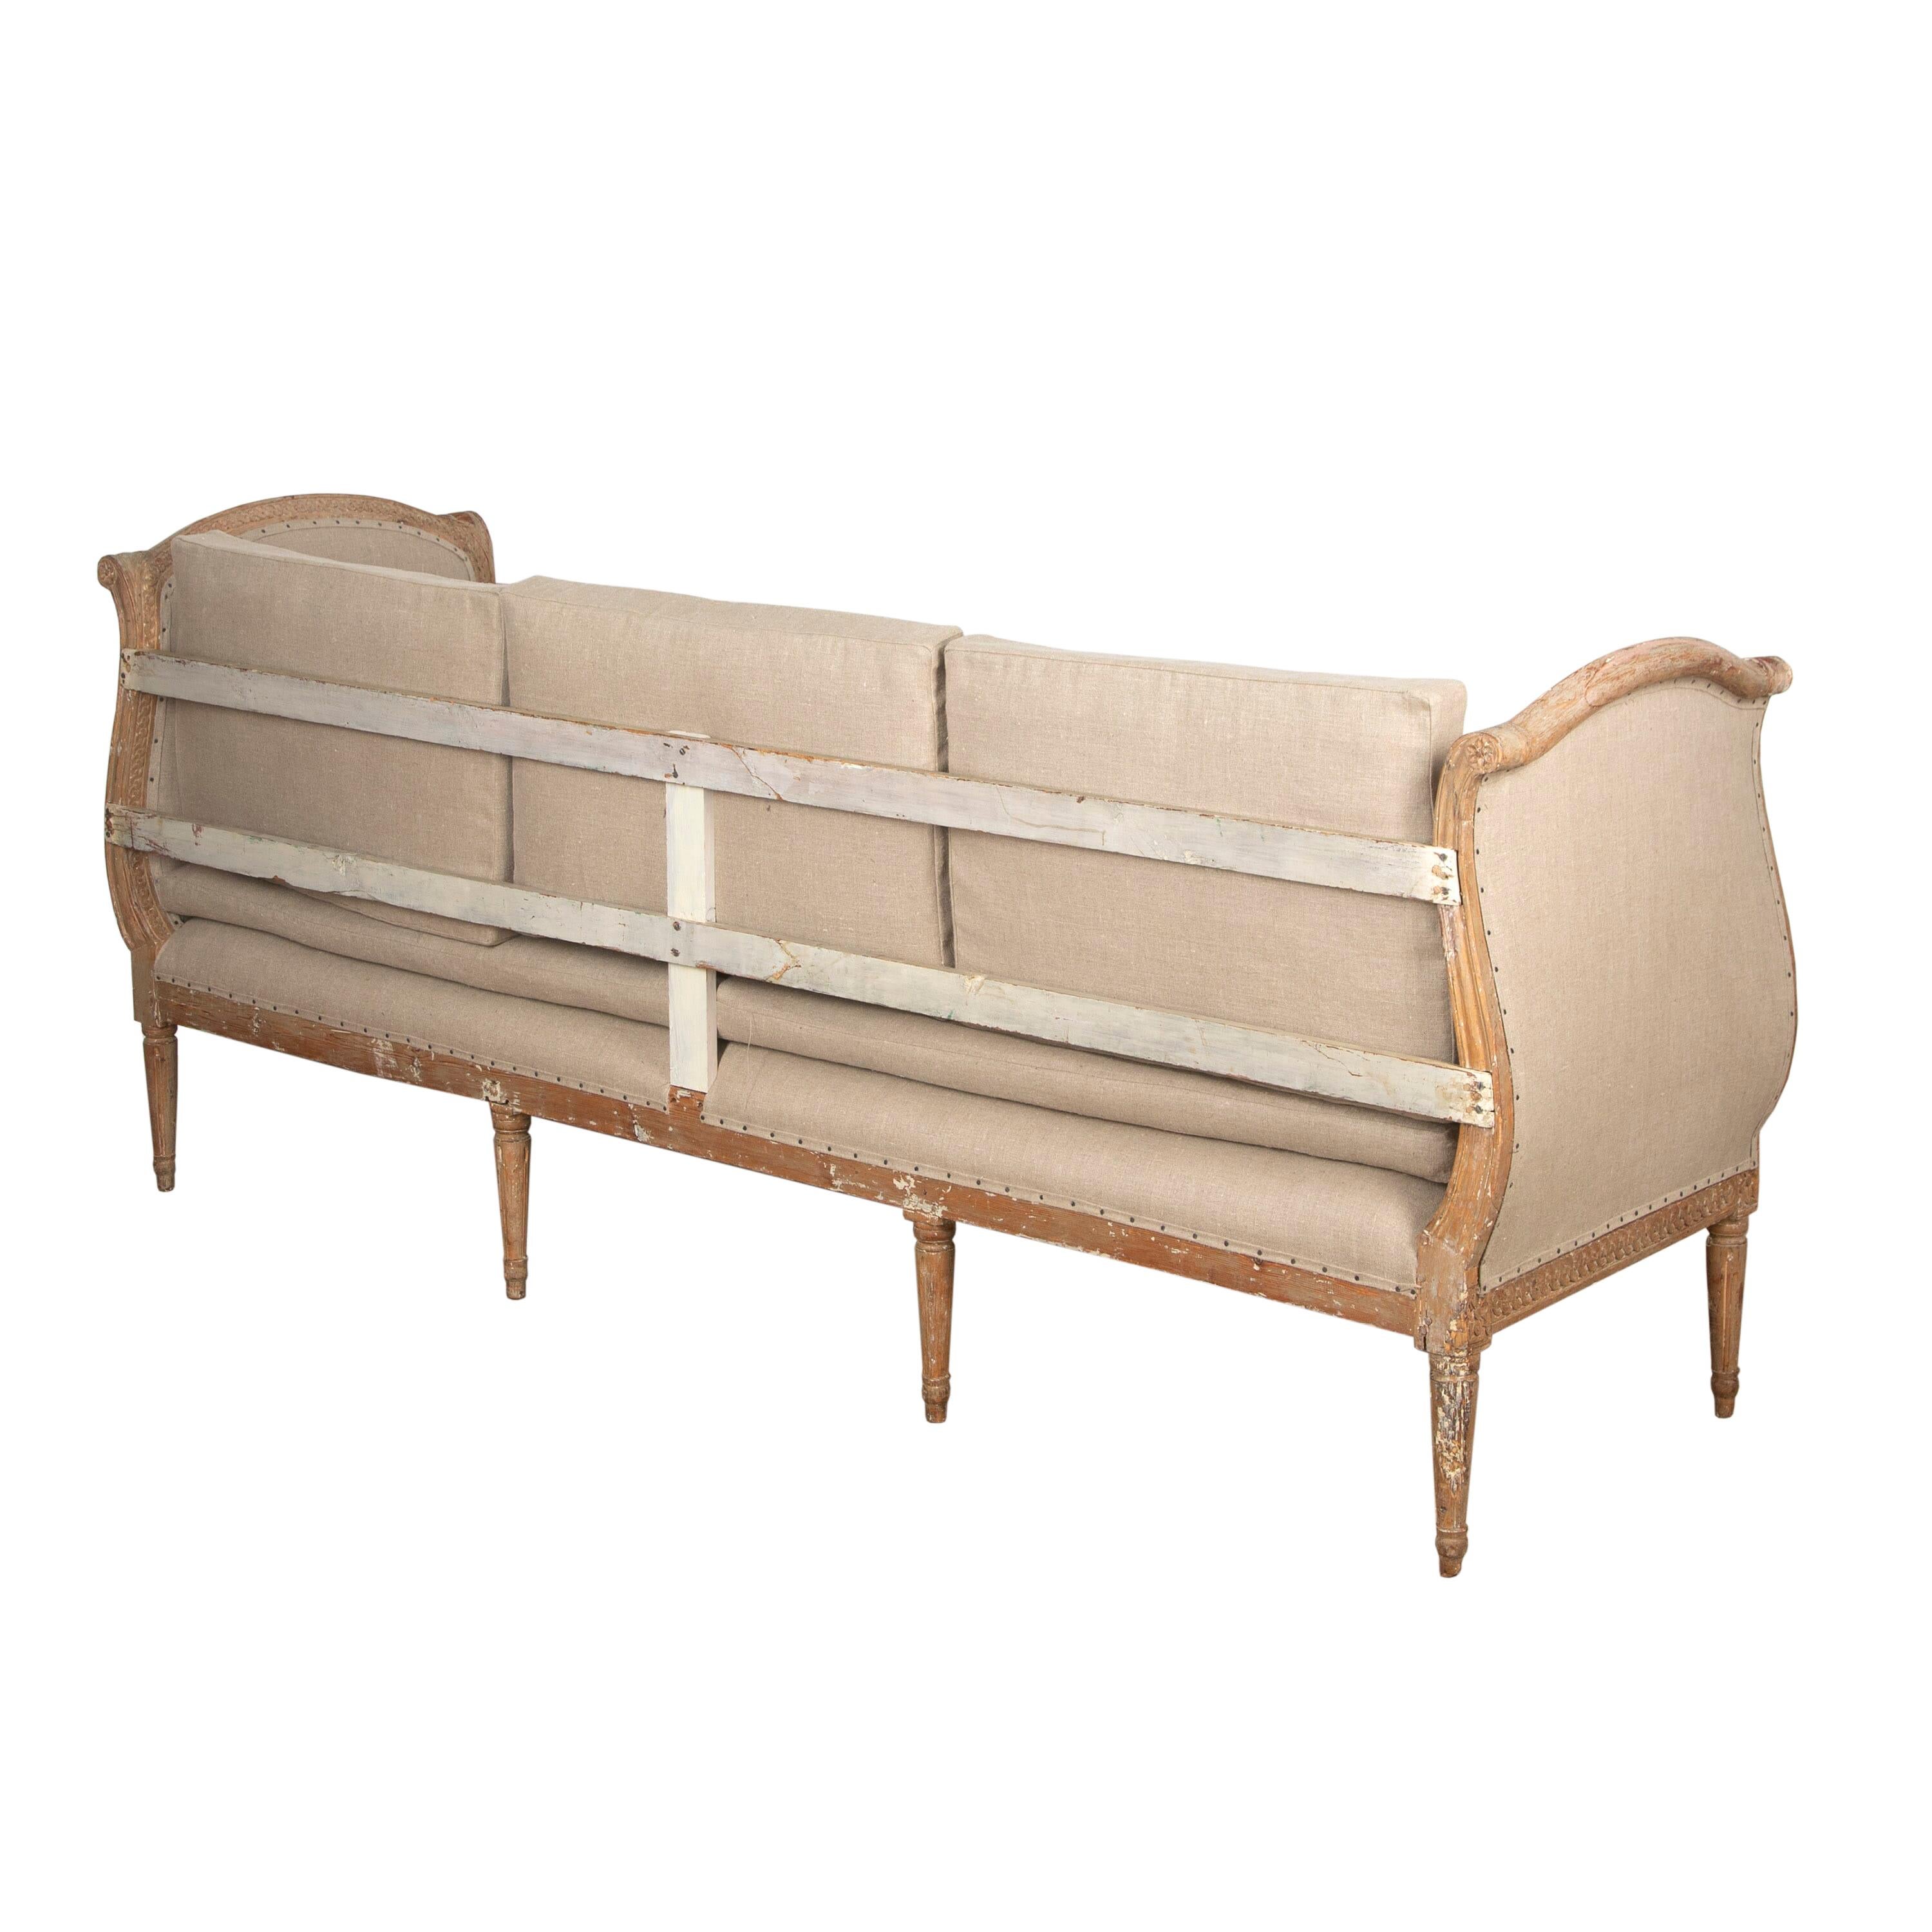 Swedish 19th century daybed with carved decorative detailing throughout. This elegant daybed has the refined neoclassical style that defined the Gustavian era. The carved wood frame features curved sides, each with hand-carved details. This daybed